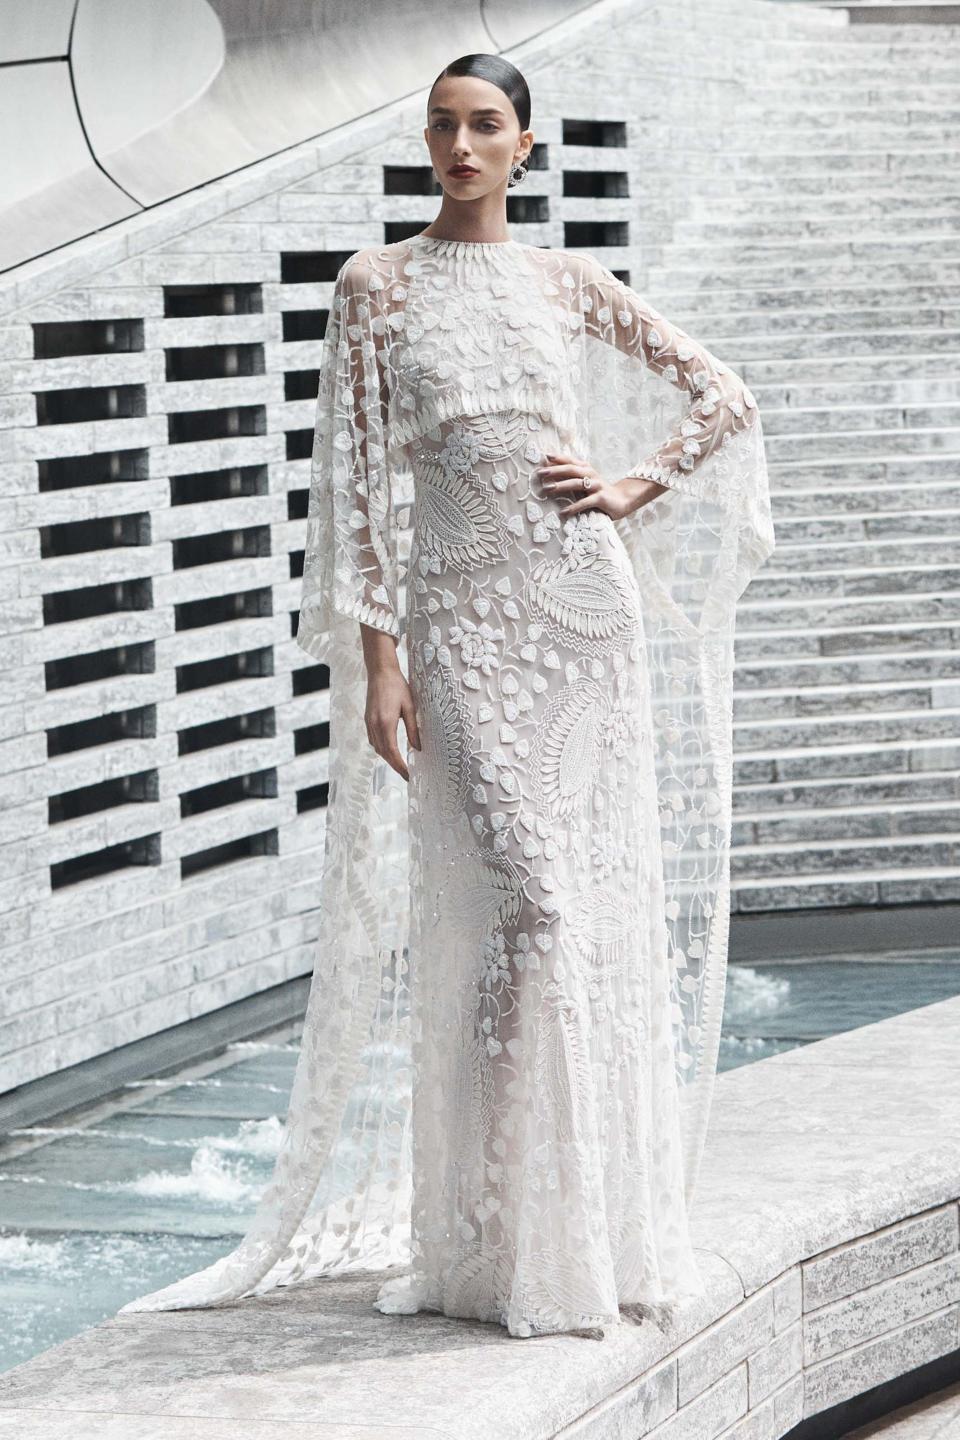 From over-the-top feathers to breezy caftans, these are the trends defining Fall 2019 bridal.